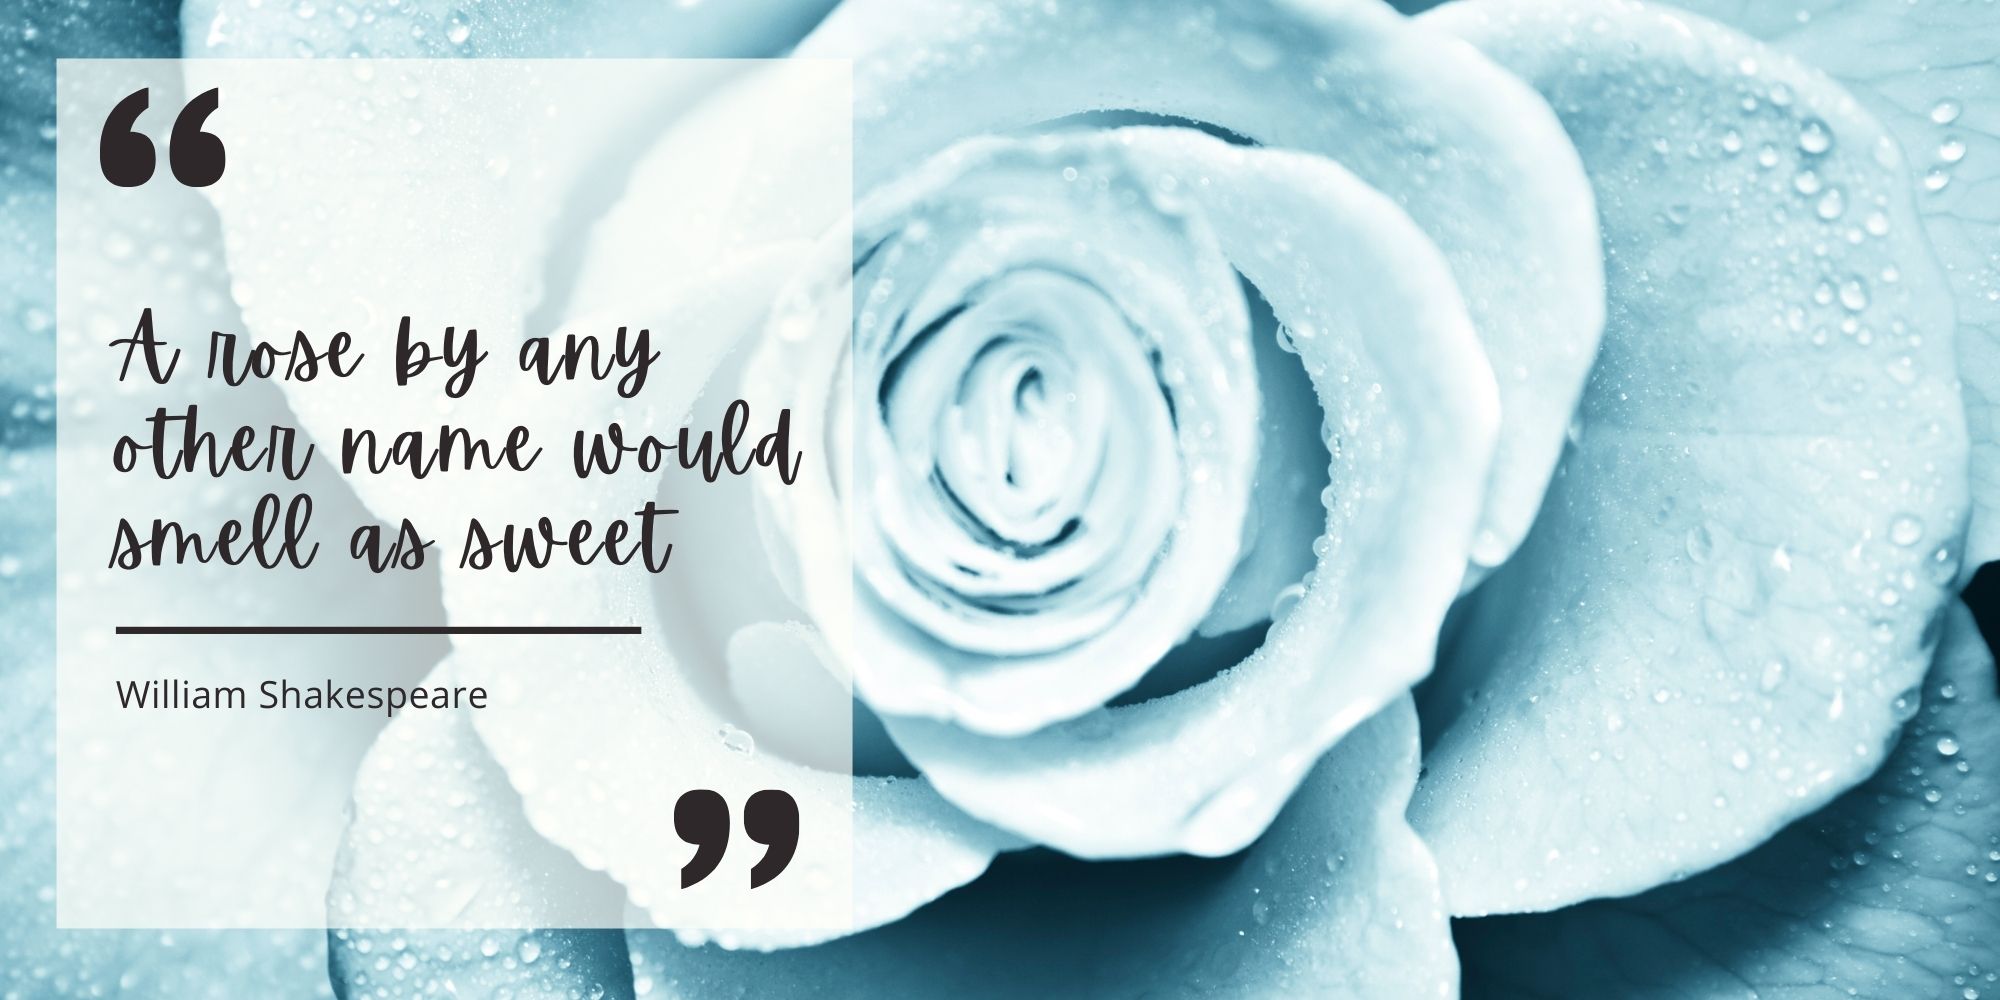 light blue rose and quote from Shakespeare